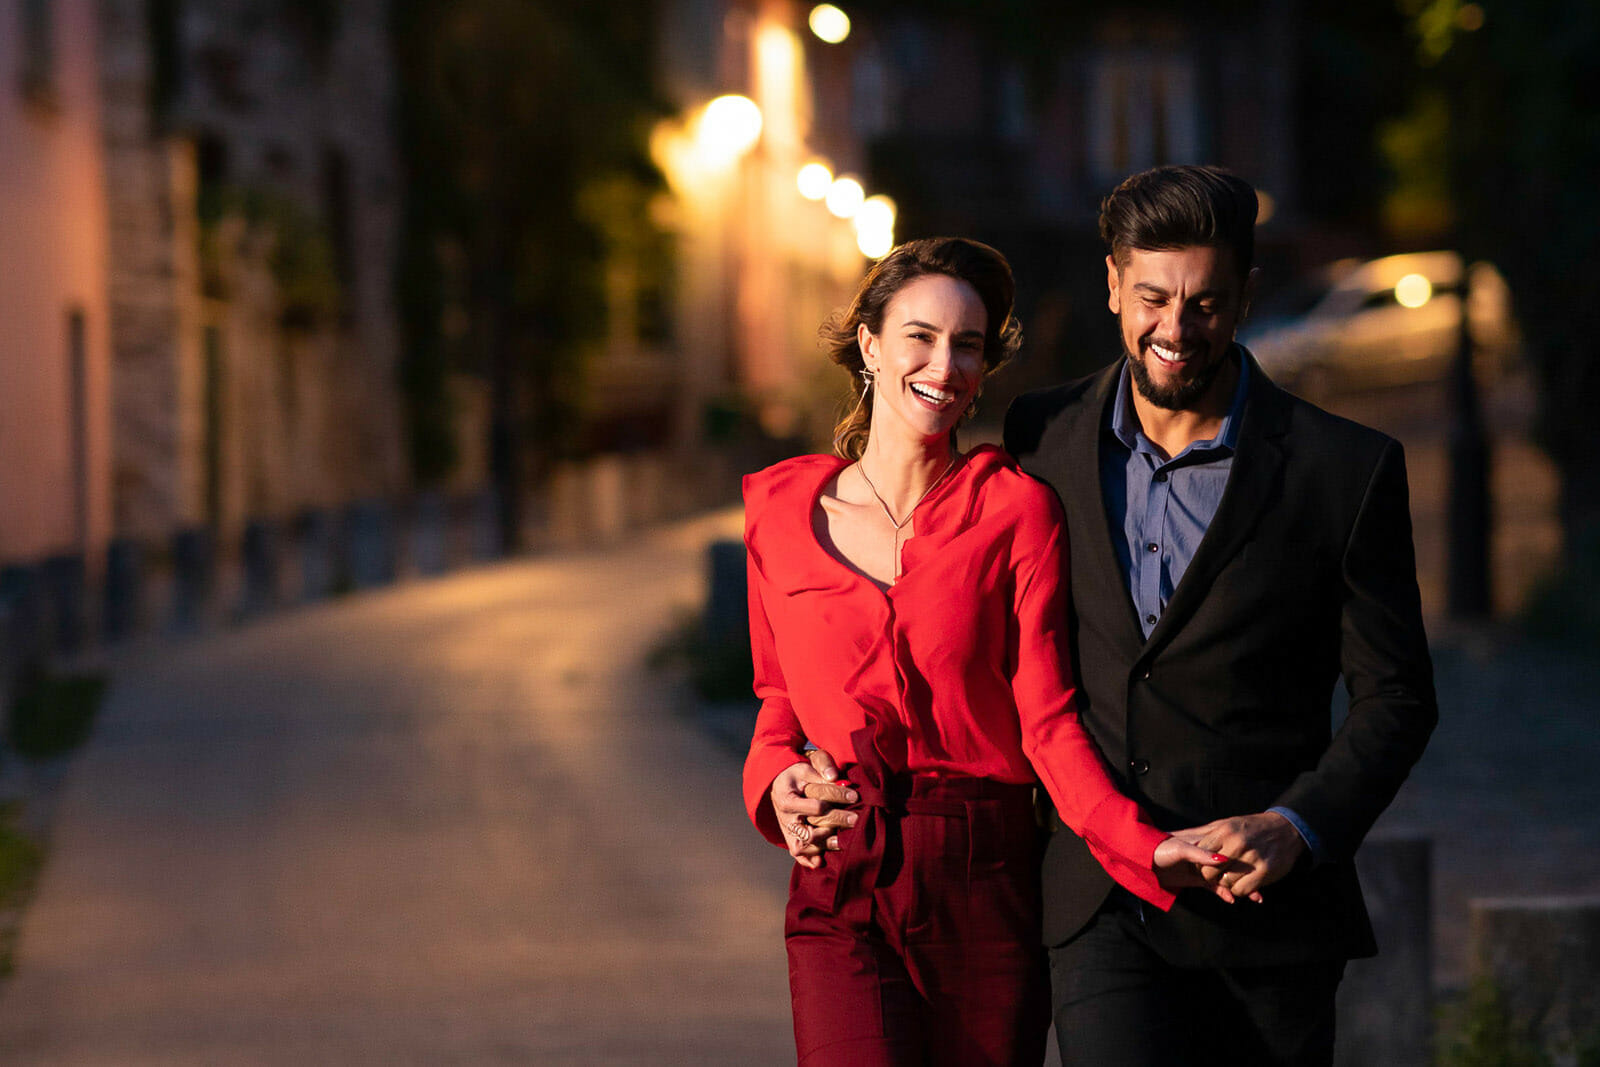 Romantic nighttime couple photoshoot at Montmartre photographed by Cengiz